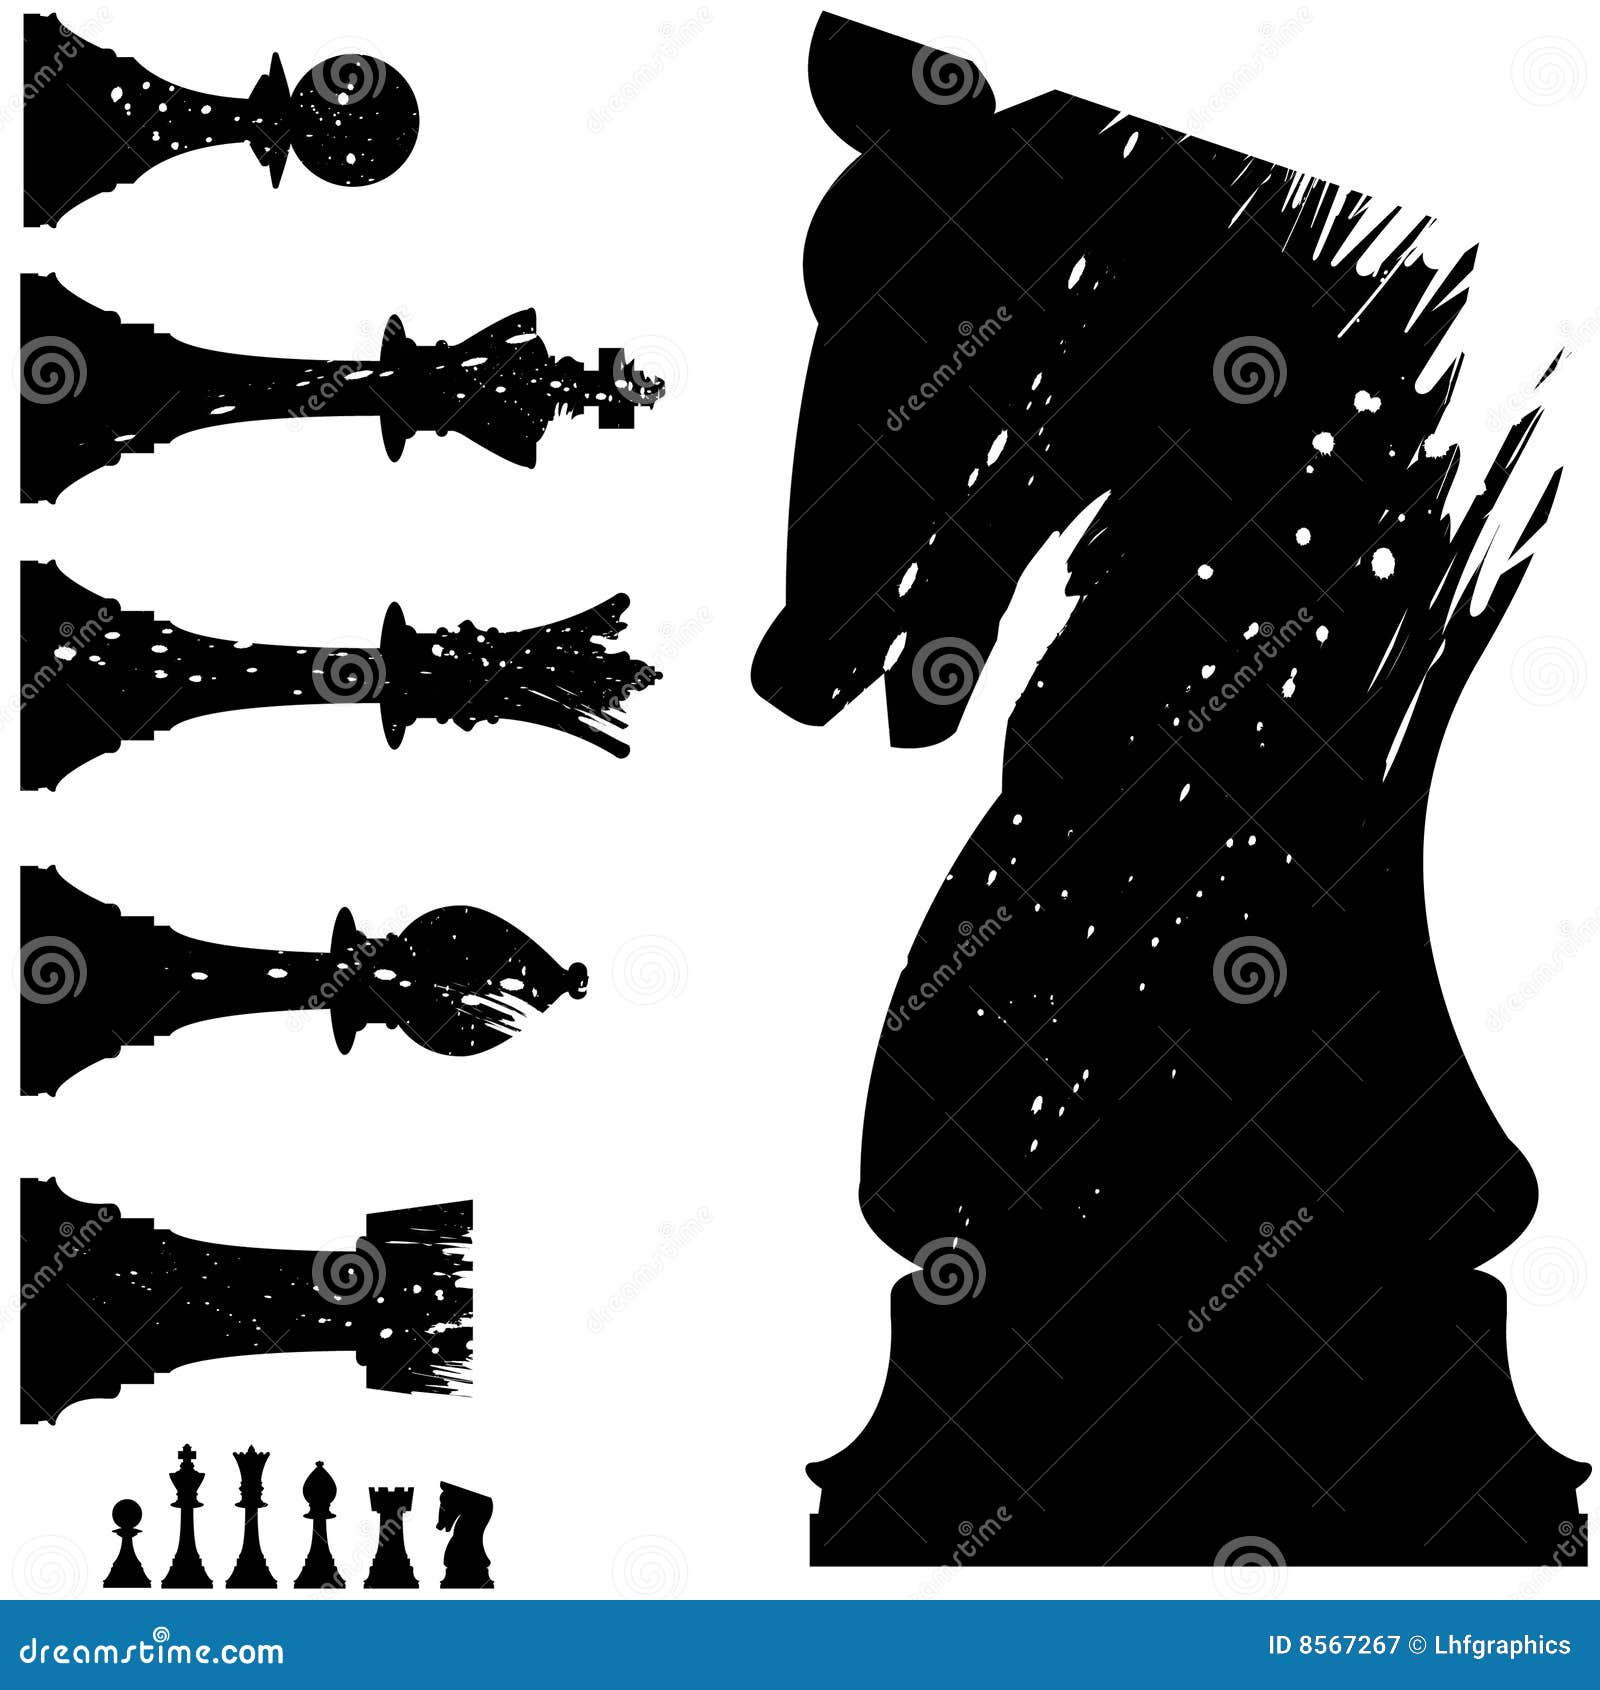  chess pieces in grunge style